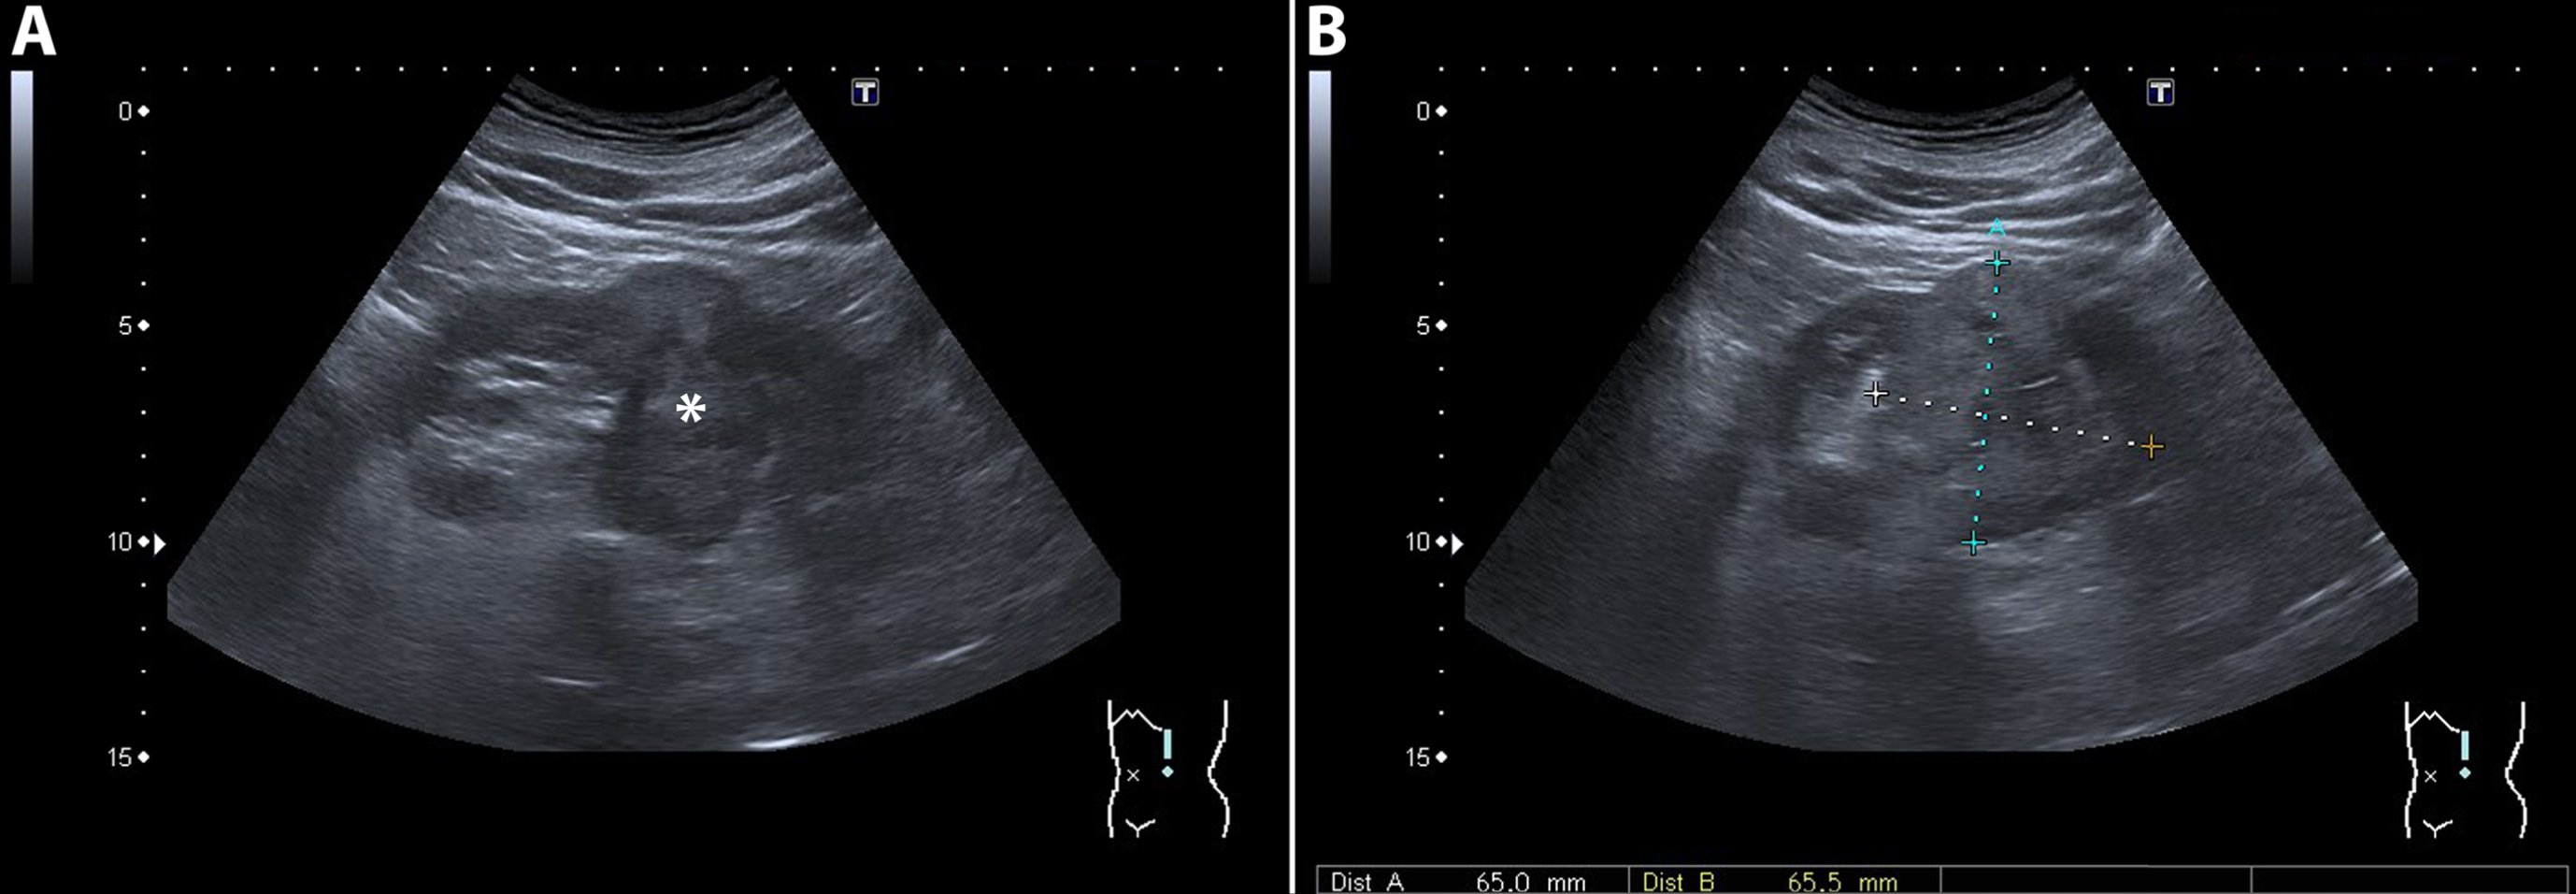 A 78-year-old man underwent ultrasound of the kidneys because of progressive renal function impairment. On the ultrasound a 65 mm large tumor (marked with an asterix) was detected in the middle/lower pole of the left kidney. The tumor was heterogeneous on ultrasound with mixed isoechoic and hyperechoic areas. A subsequent CT confirmed the presence of a renal tumor with a heterogeneous aspect and strong contrast enhancement suspect for RCC. Pathology report showed a 120 mm large Fuhrman grade II clear cell RCC.